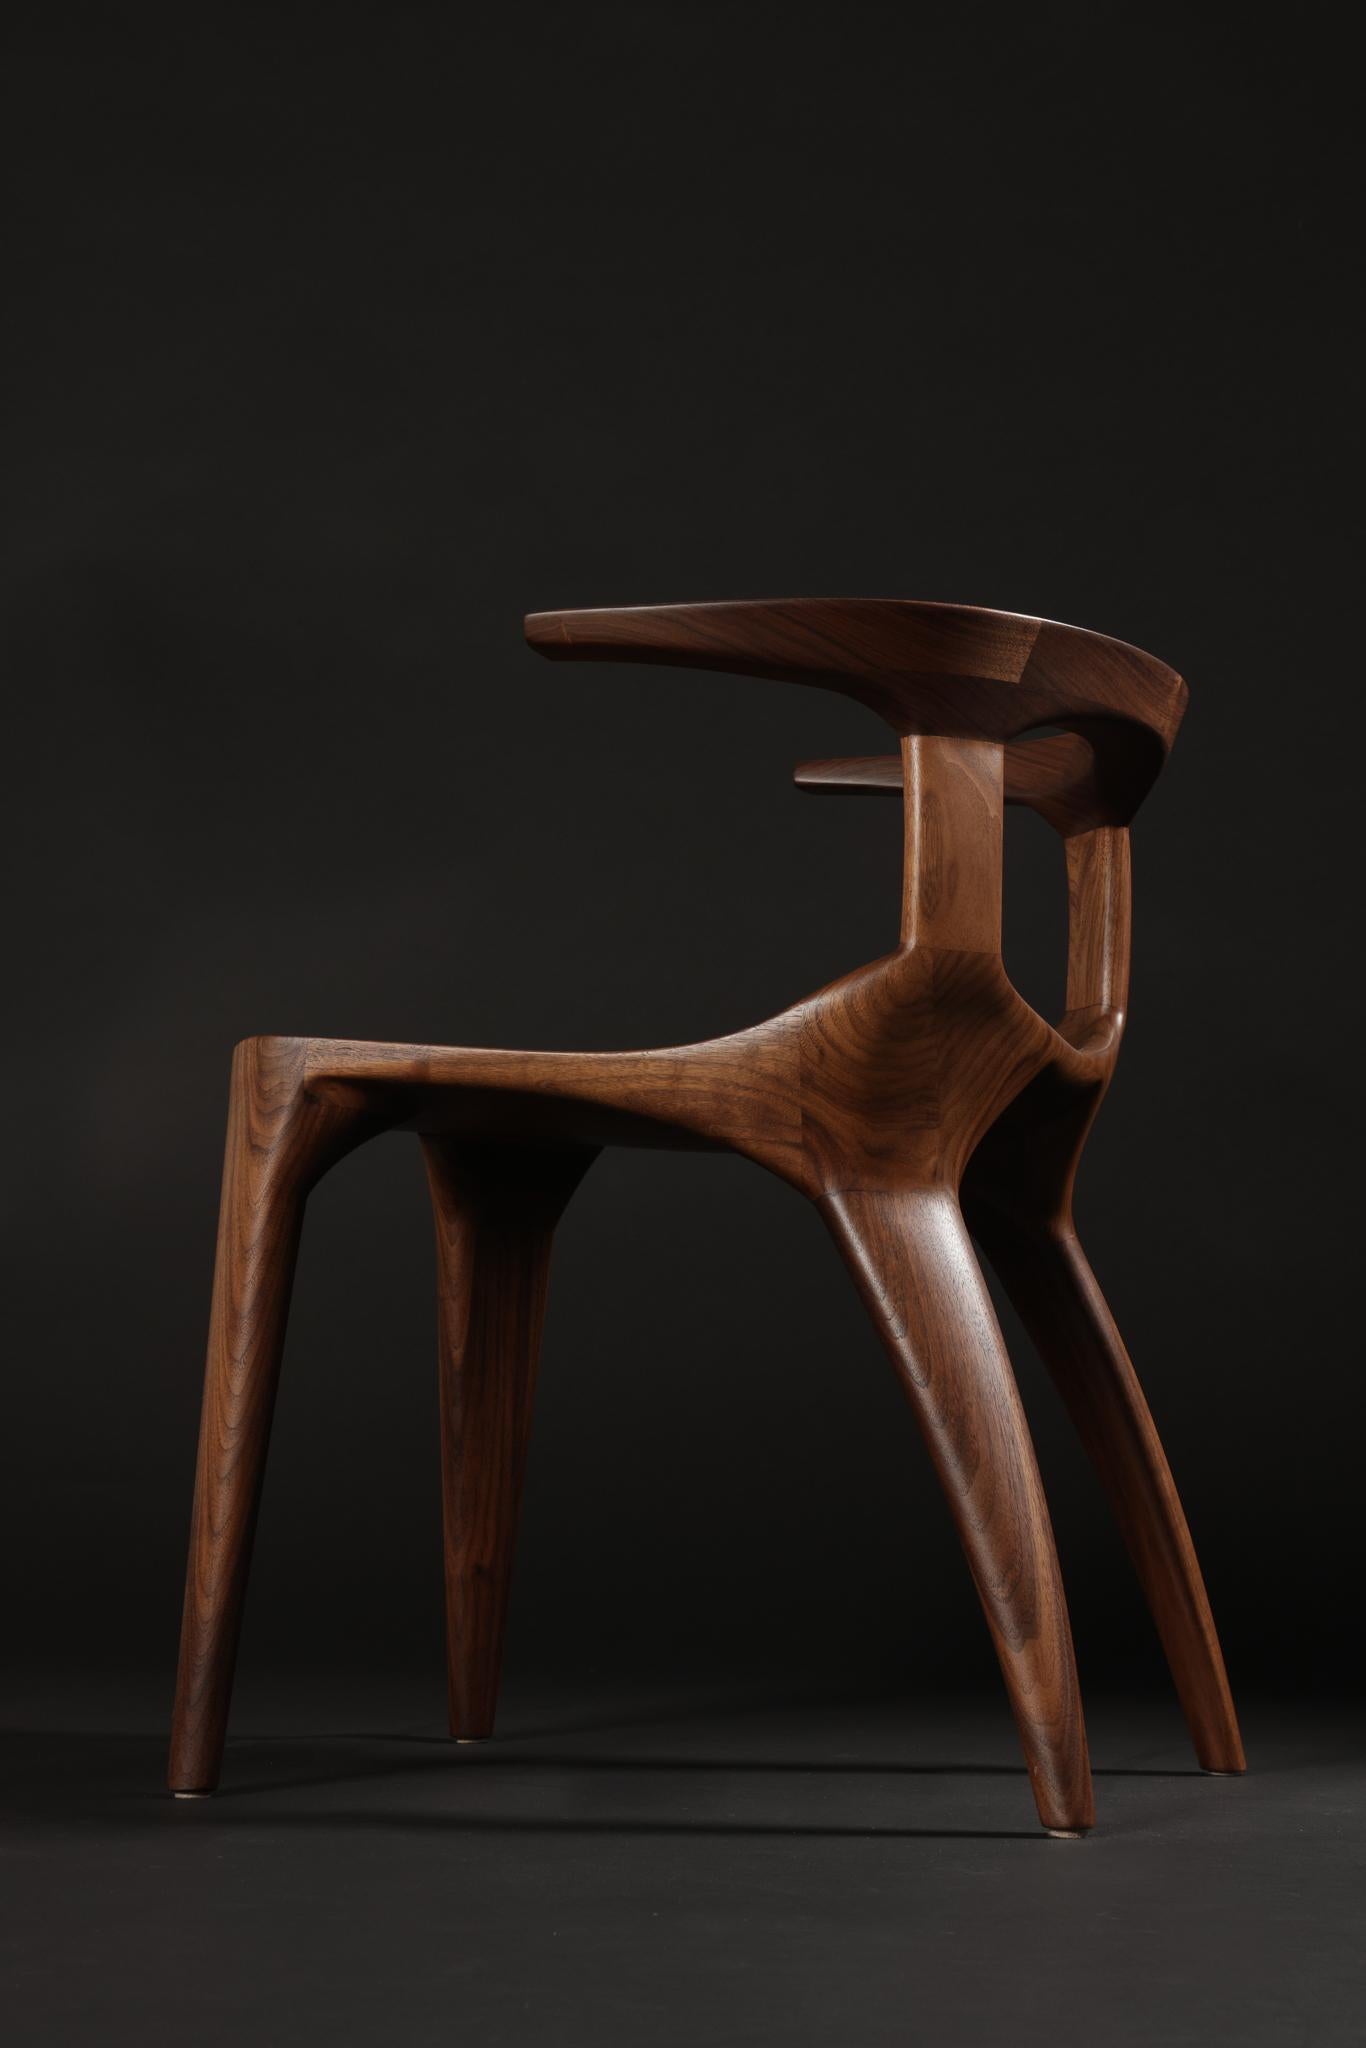 Complex yet functional joinery transcends trends making this piece a timeless addition to any interior decor.  On it's own or as a set, a contemporary classic.  

One American Black Walnut chair in stock as pictured, otherwise chairs are